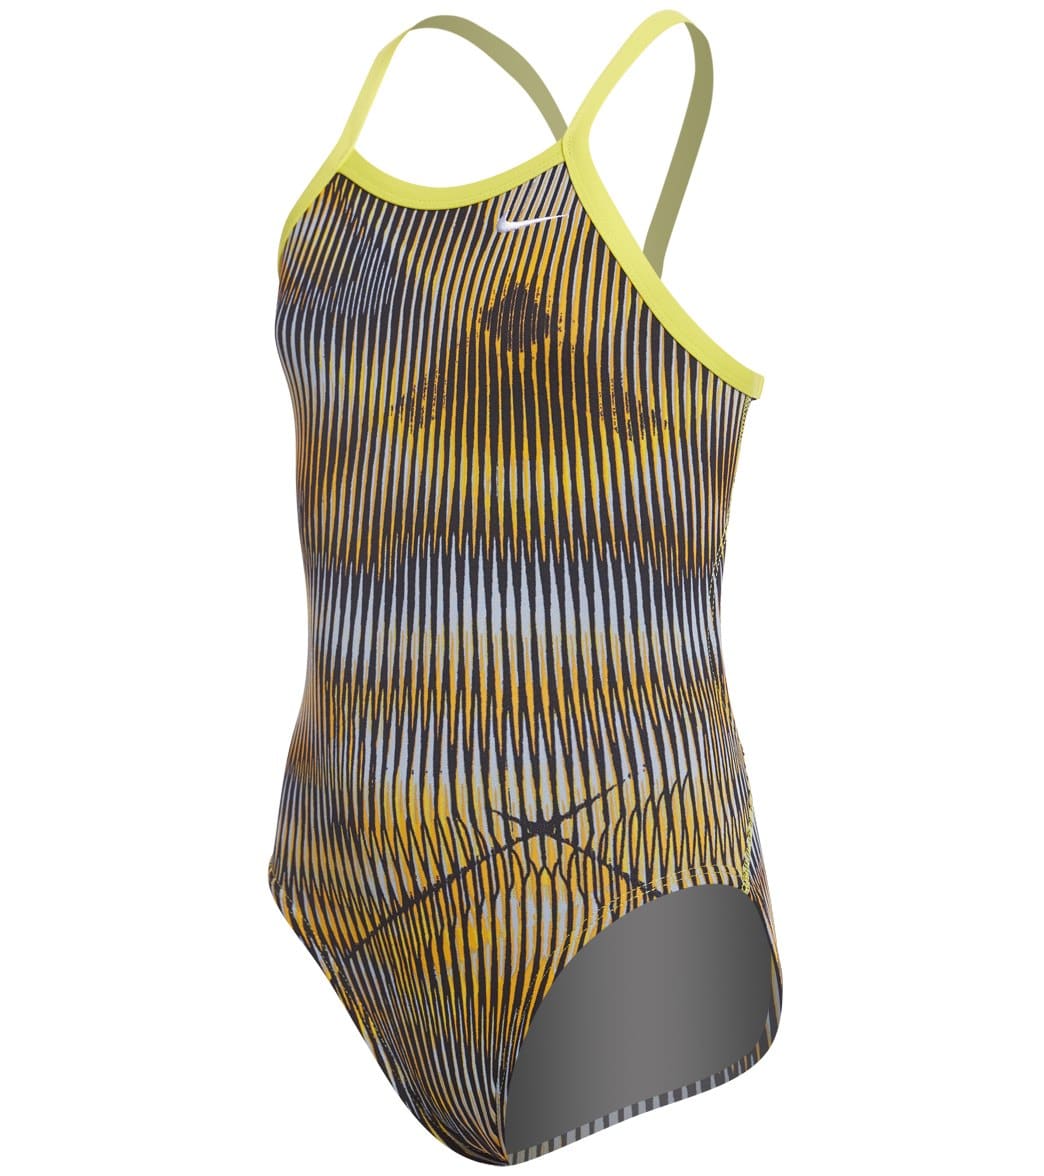 Nike Girls' Vibe Lingerie Tank One Piece Swimsuit - Varsity Maize 22 Polyester - Swimoutlet.com